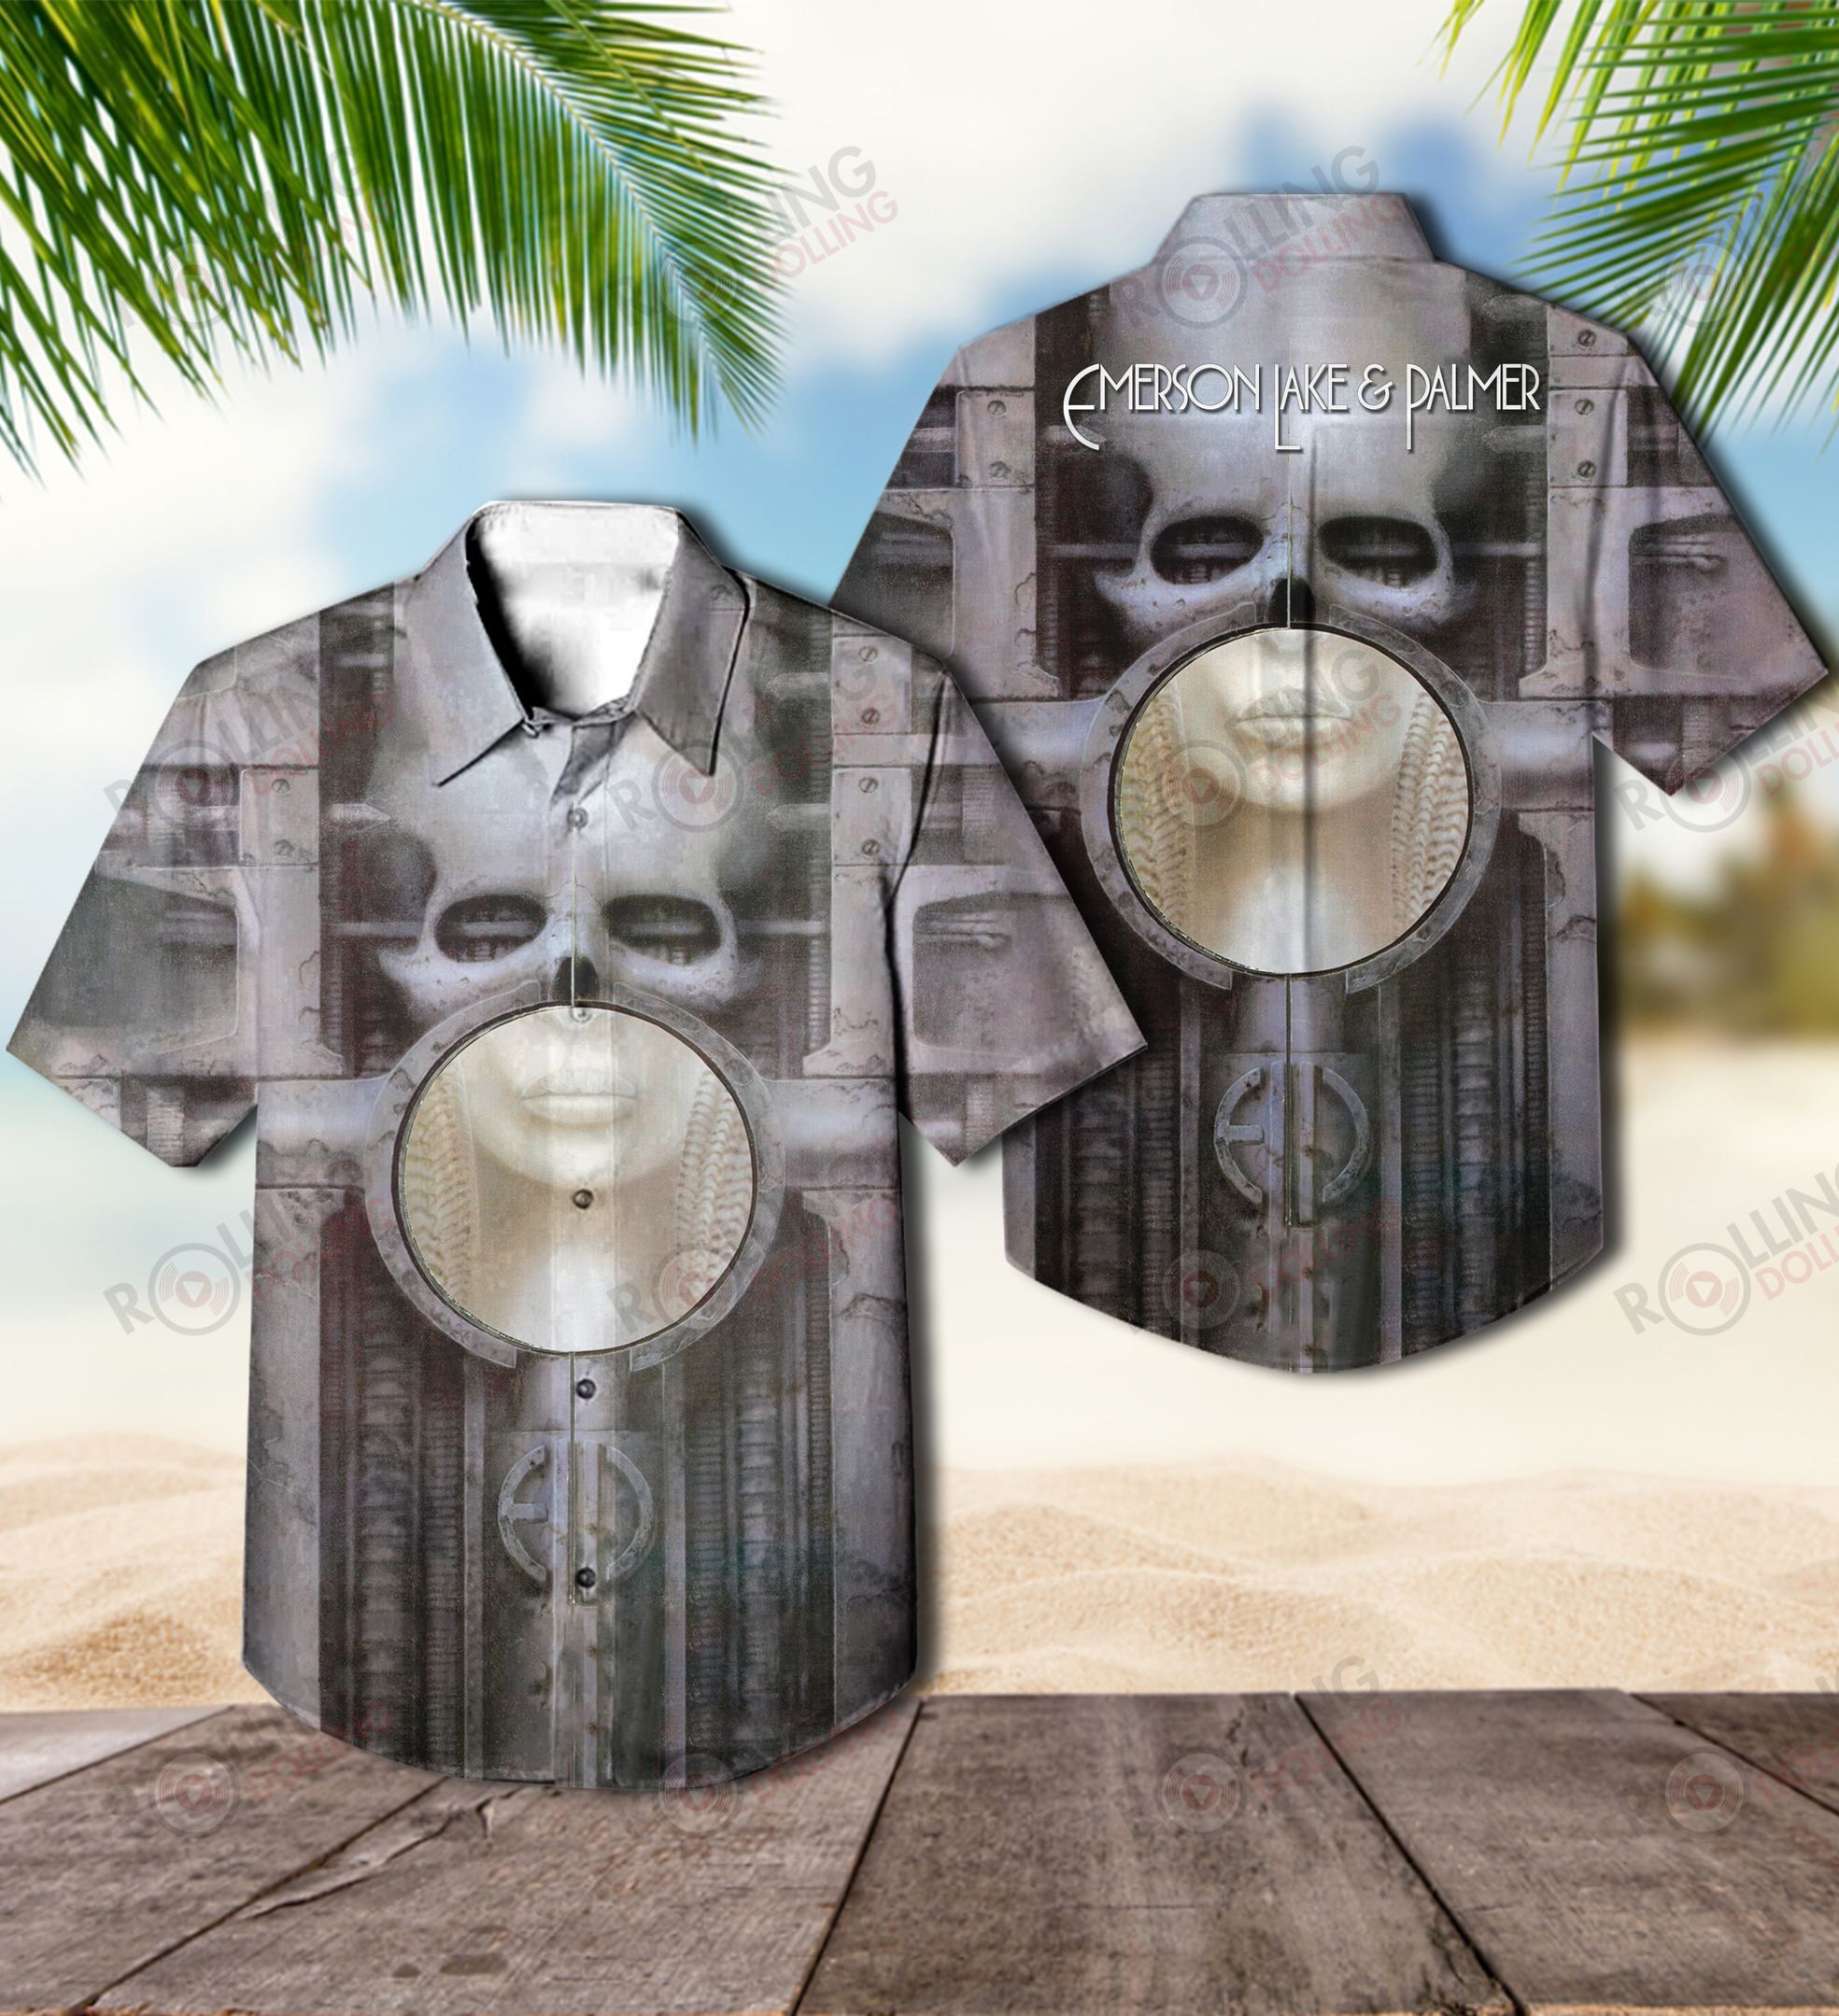 We have compiled a list of some of the best Hawaiian shirt that are available 195